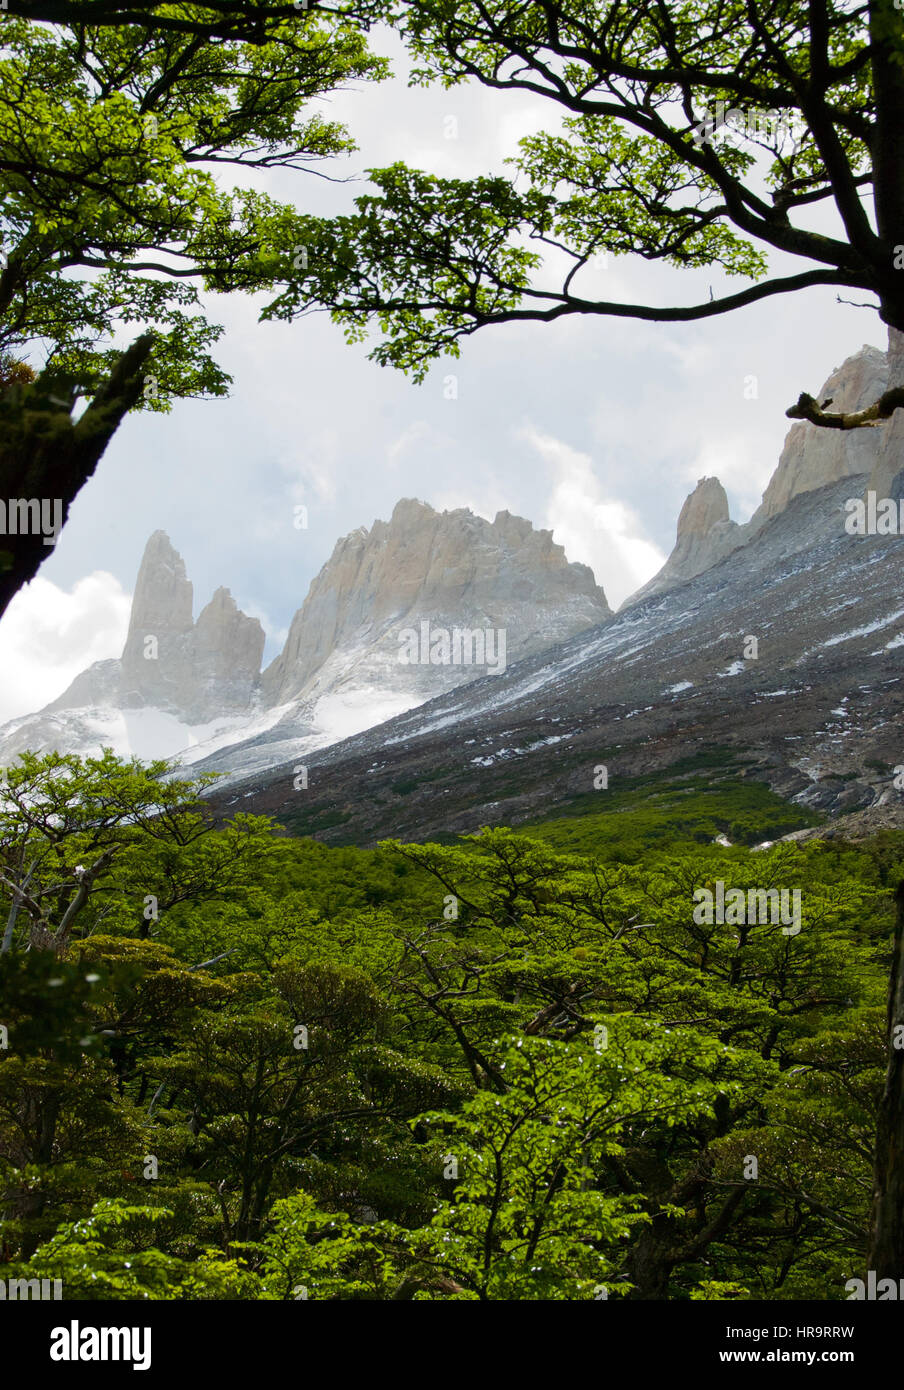 The French Valley in Torres del Paine National Park, Chile. Viewed while hiking the W Trek around the park. Stock Photo